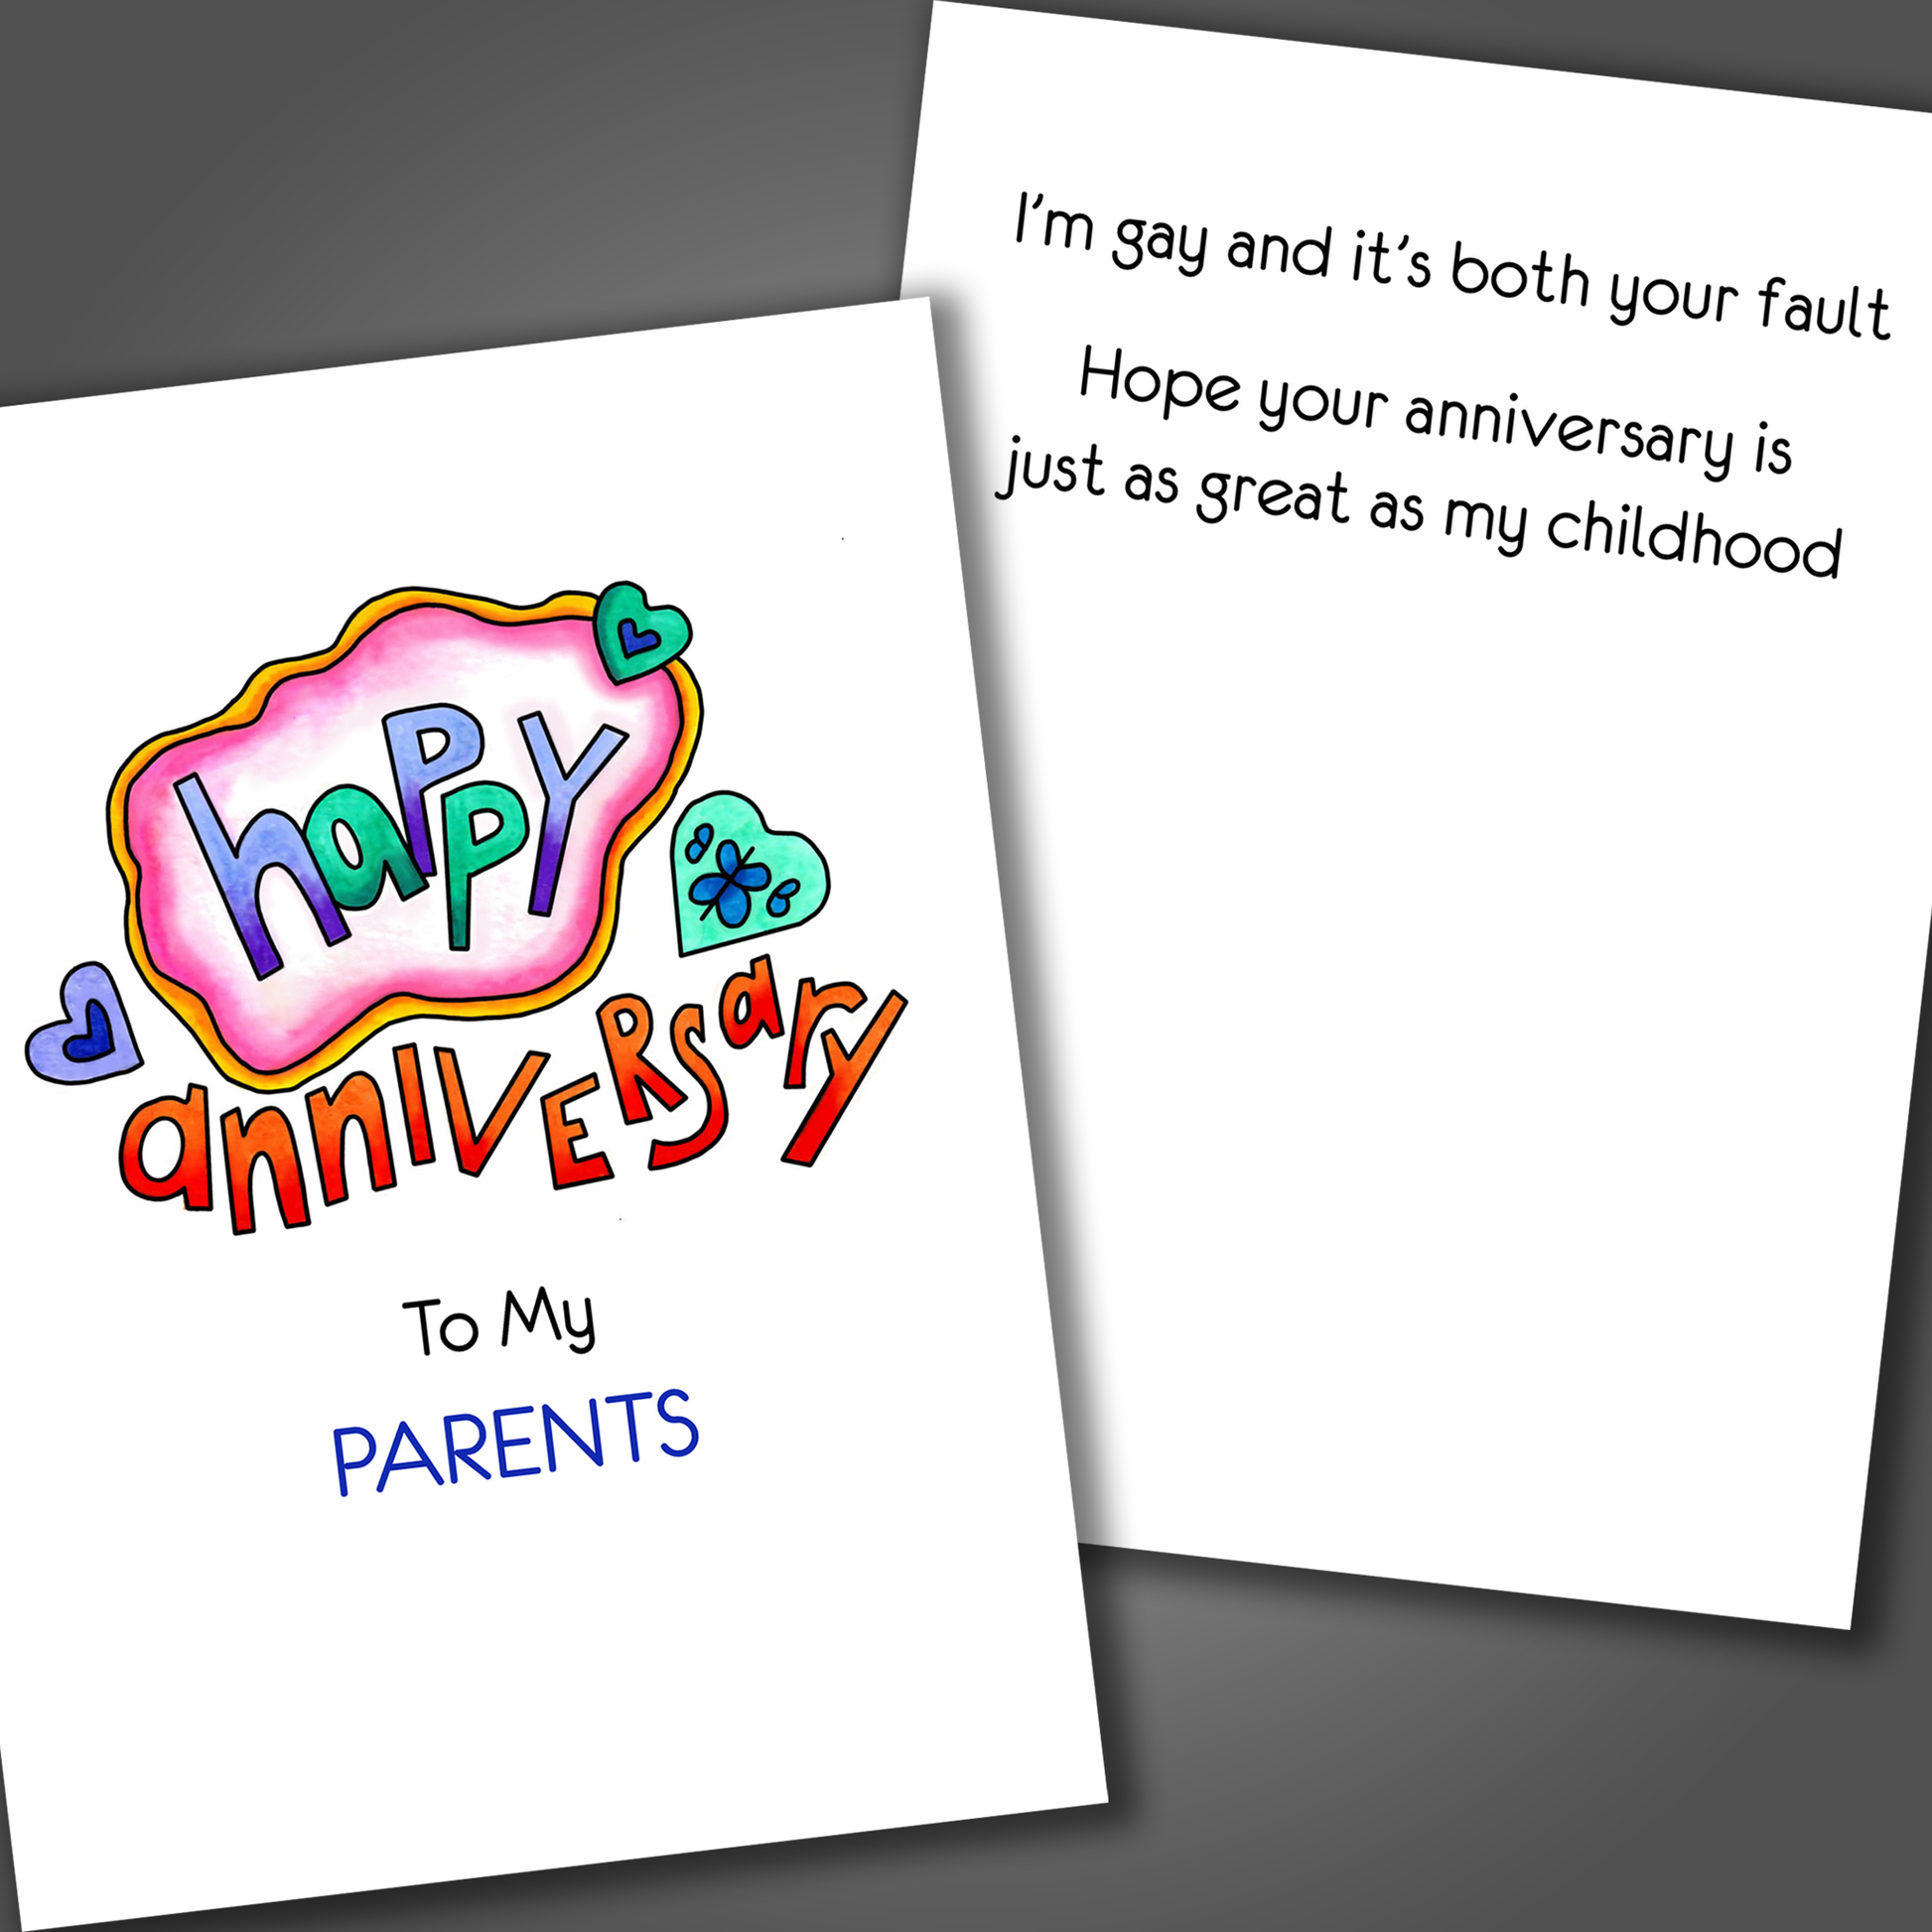 Funny anniversary card for parents with three hearts on front and a funny joke inside of card that says I am gay and it's both your fault!